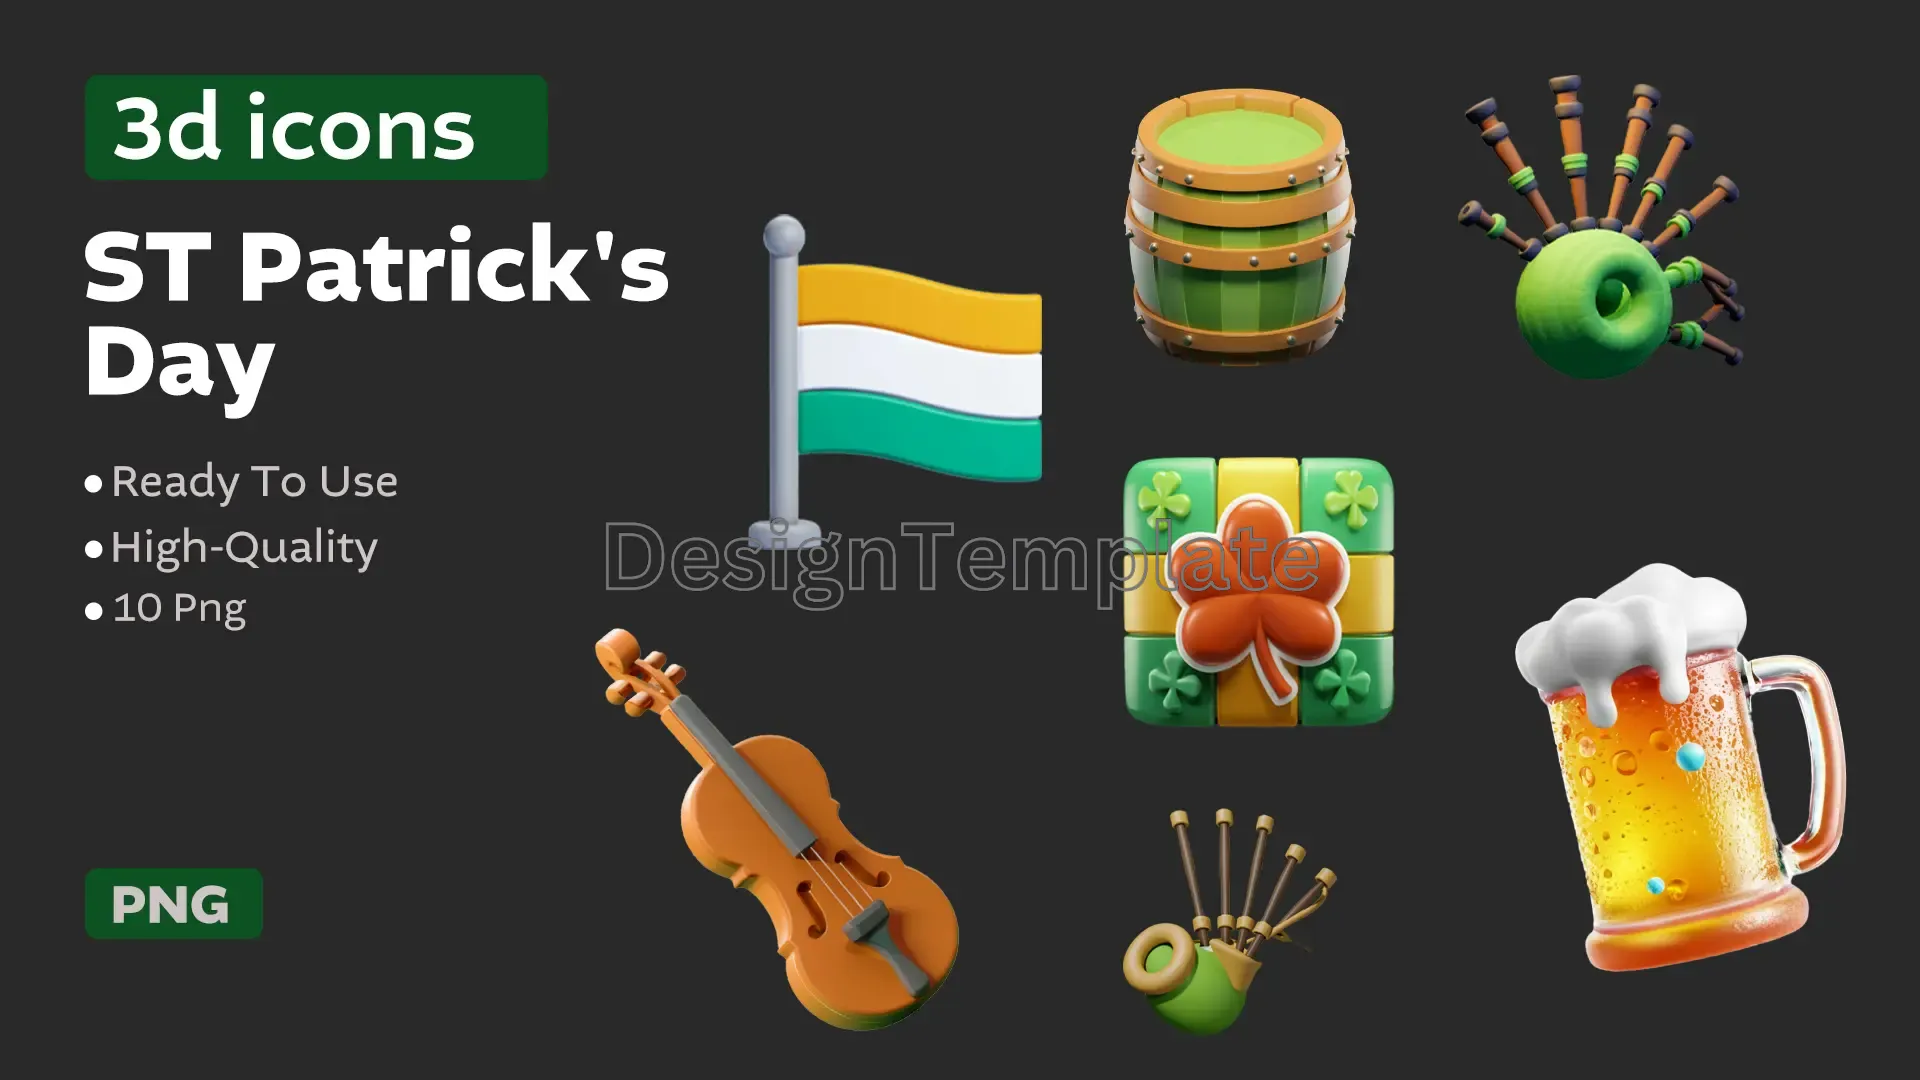 Emerald Isle Exquisite St. Patrick's Day 3D Elements image